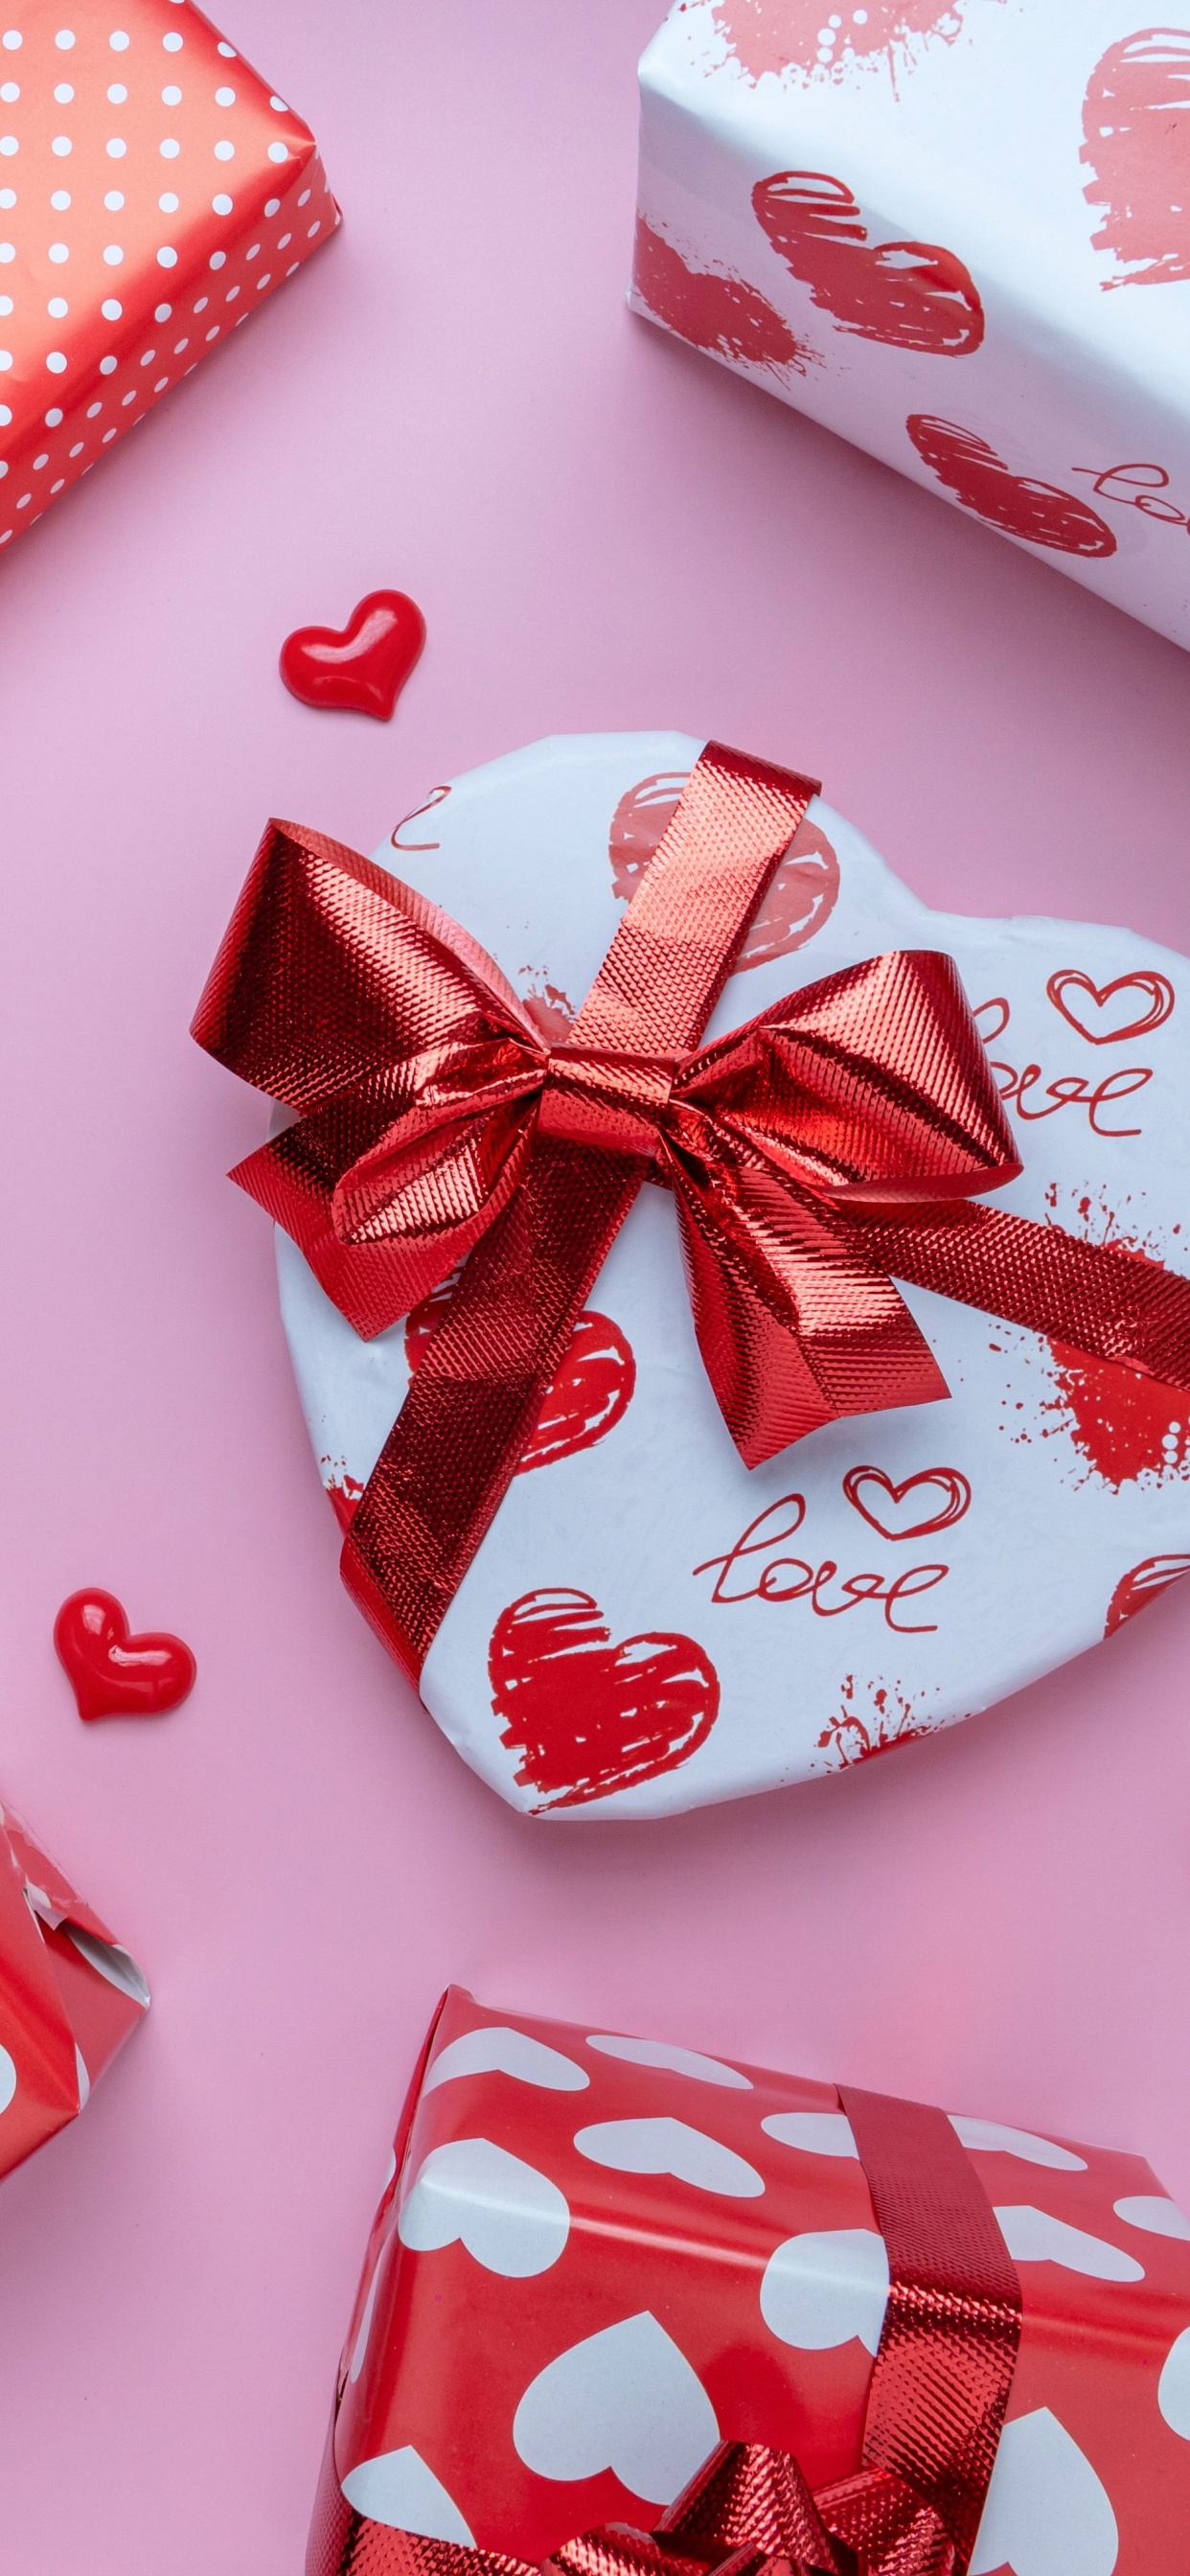 Valentine Gifts Wallpaper 4K, Heart shape, Gift Boxes, Love, #4622